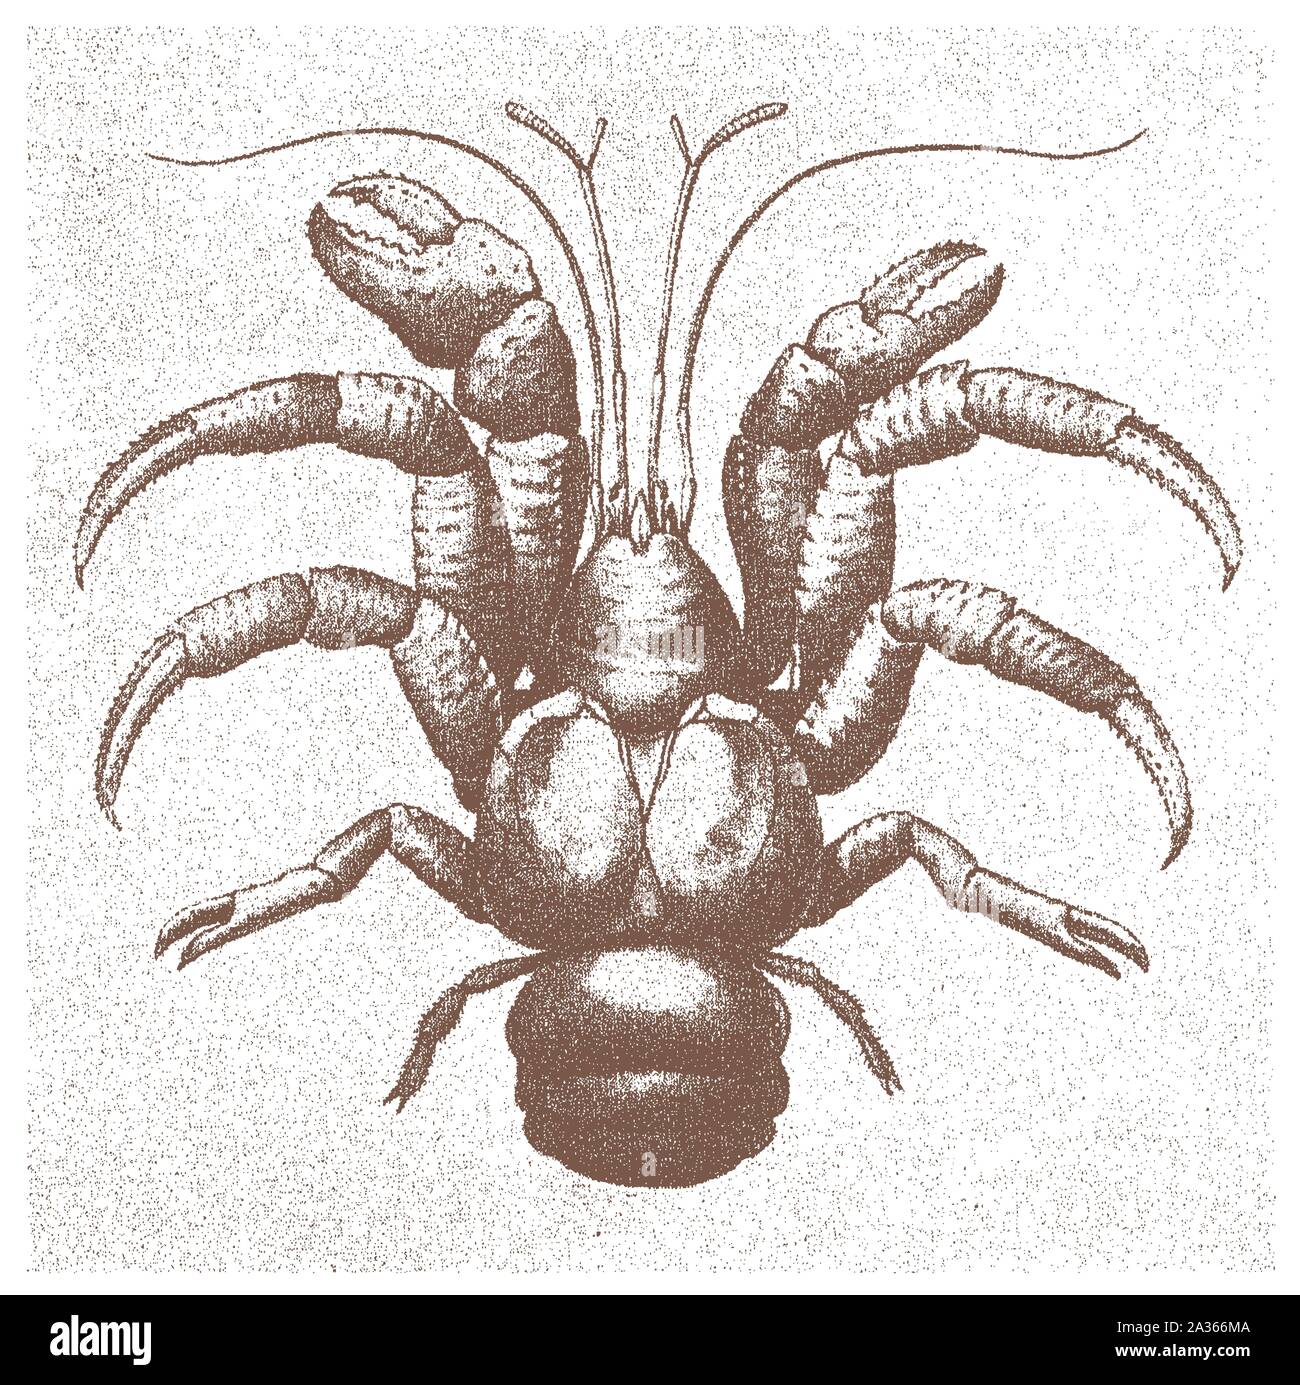 Coconut crab (birgus latro) in top view. Illustration after a historical lithography from the early 20th century Stock Vector